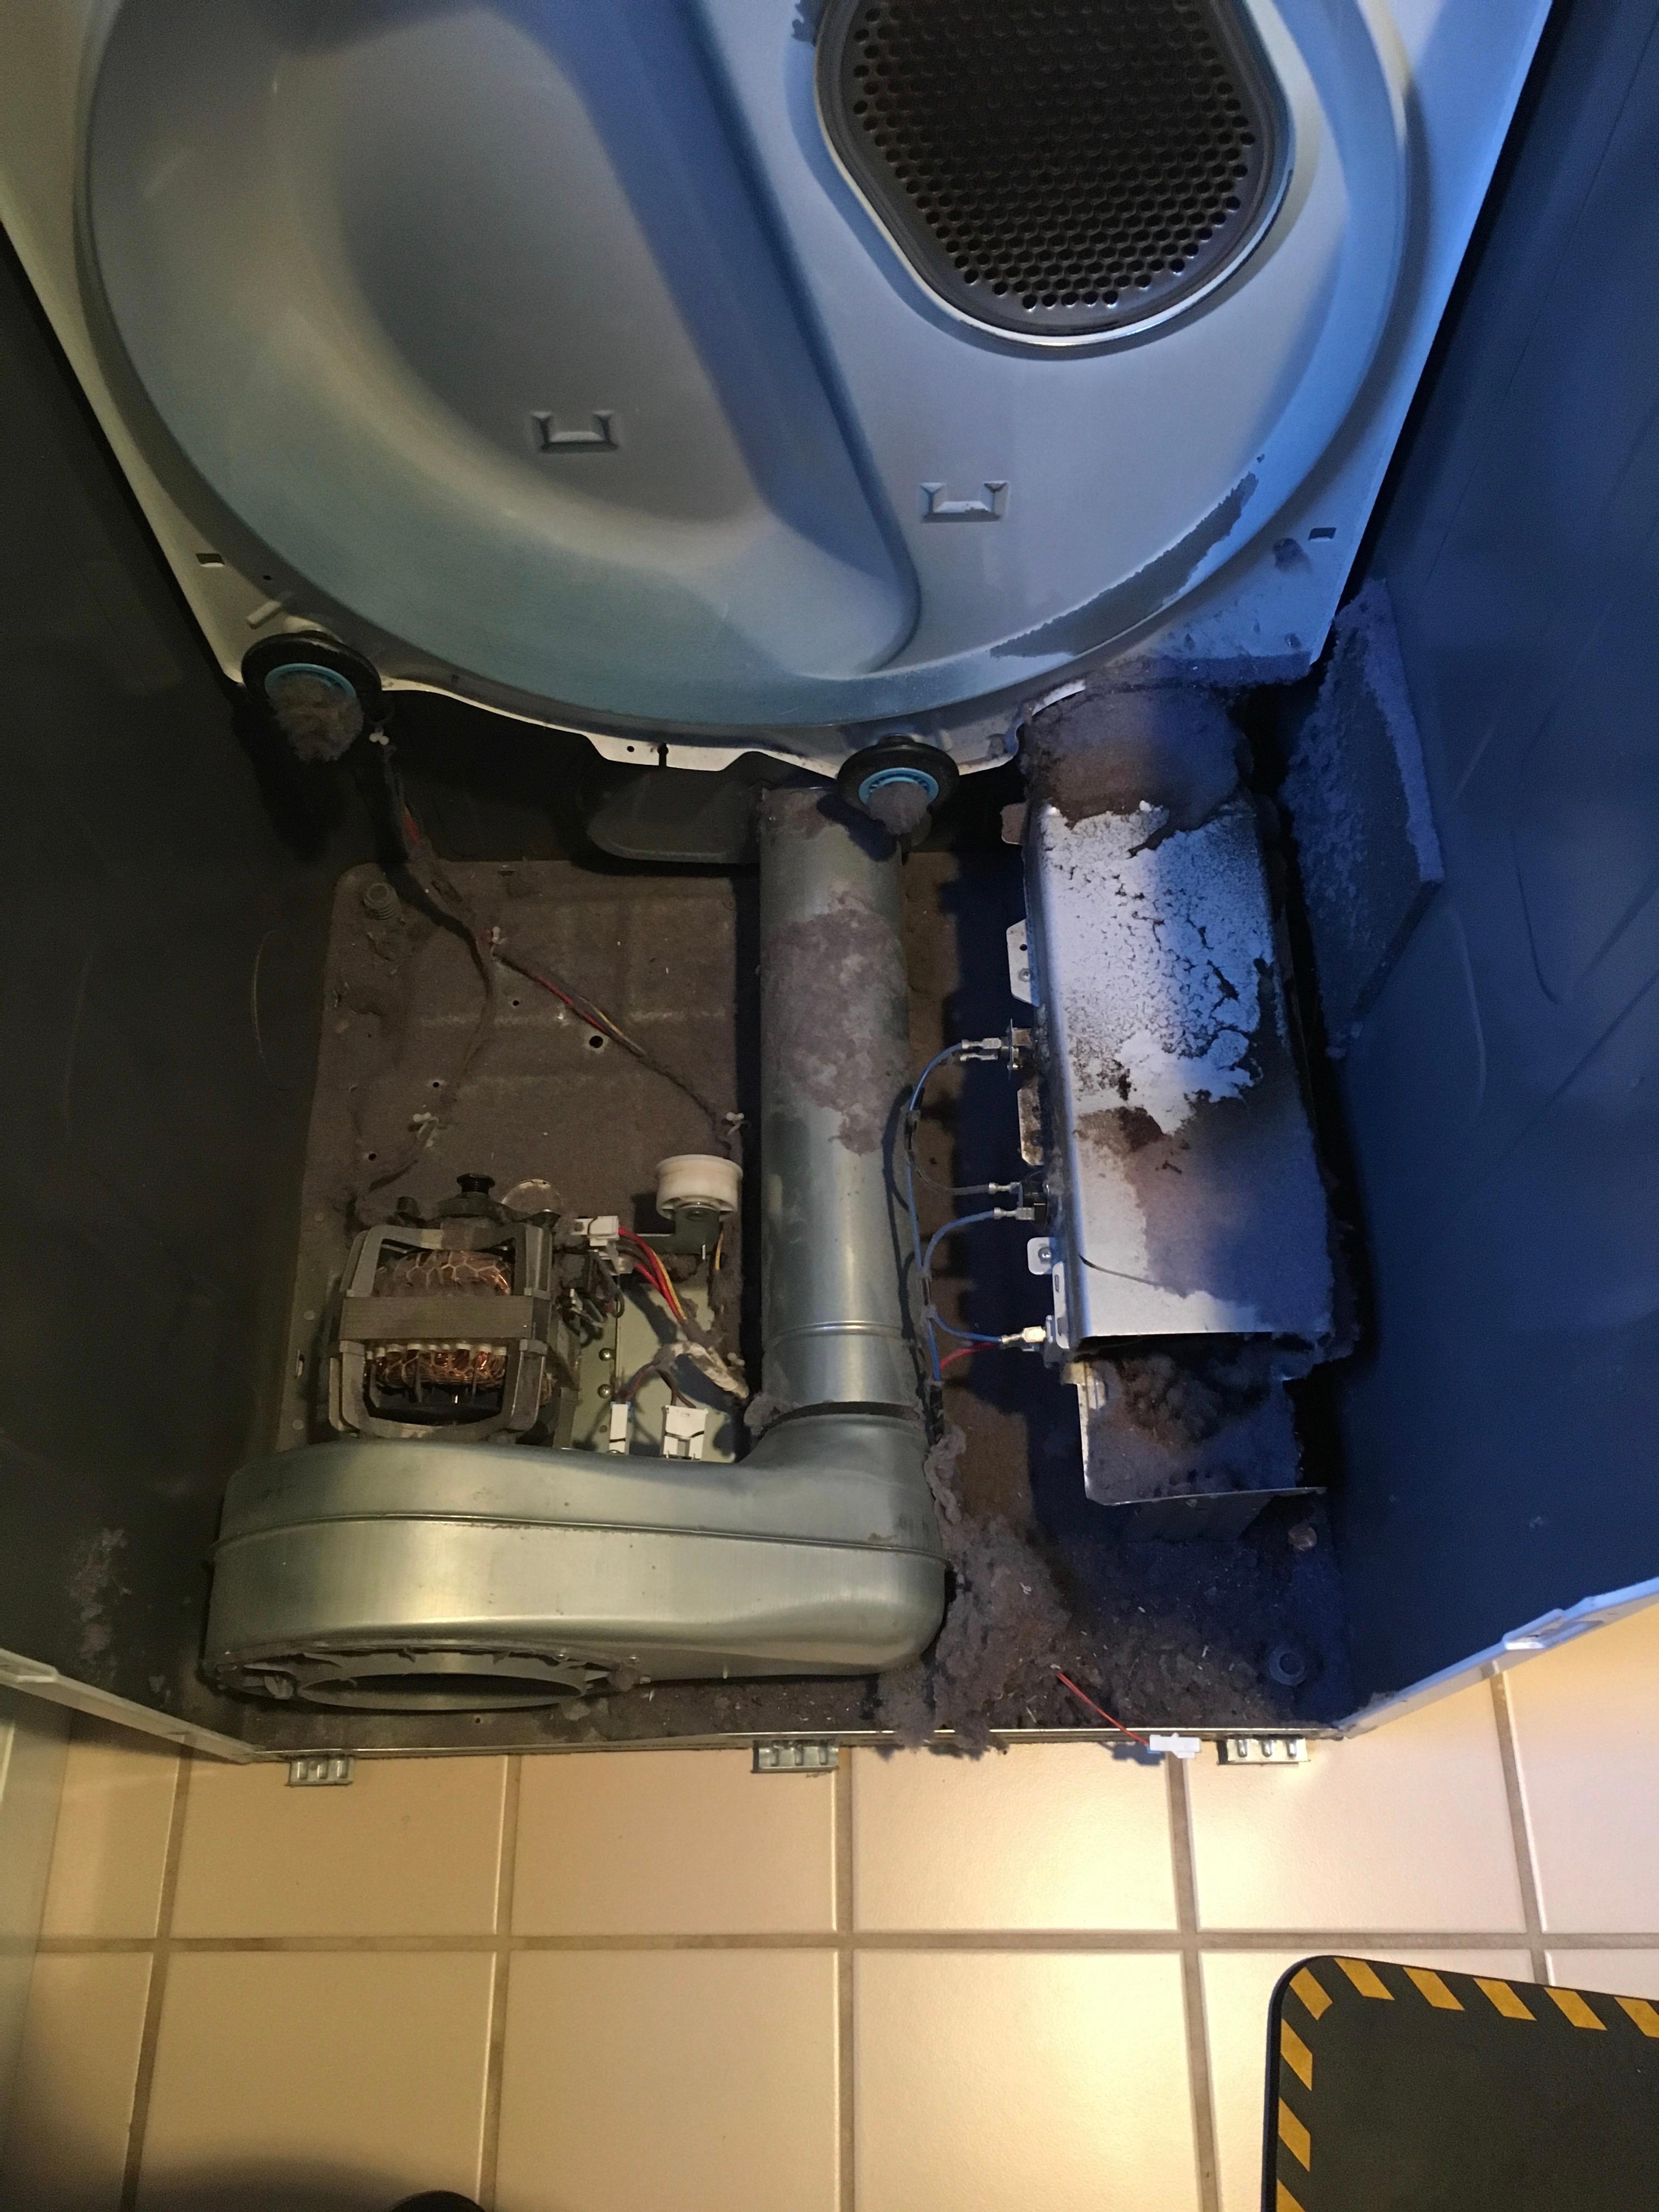 Picture of FixEm Appliance Repair - Dryer servicing and maintenance - Before - FixEm Appliance Repair